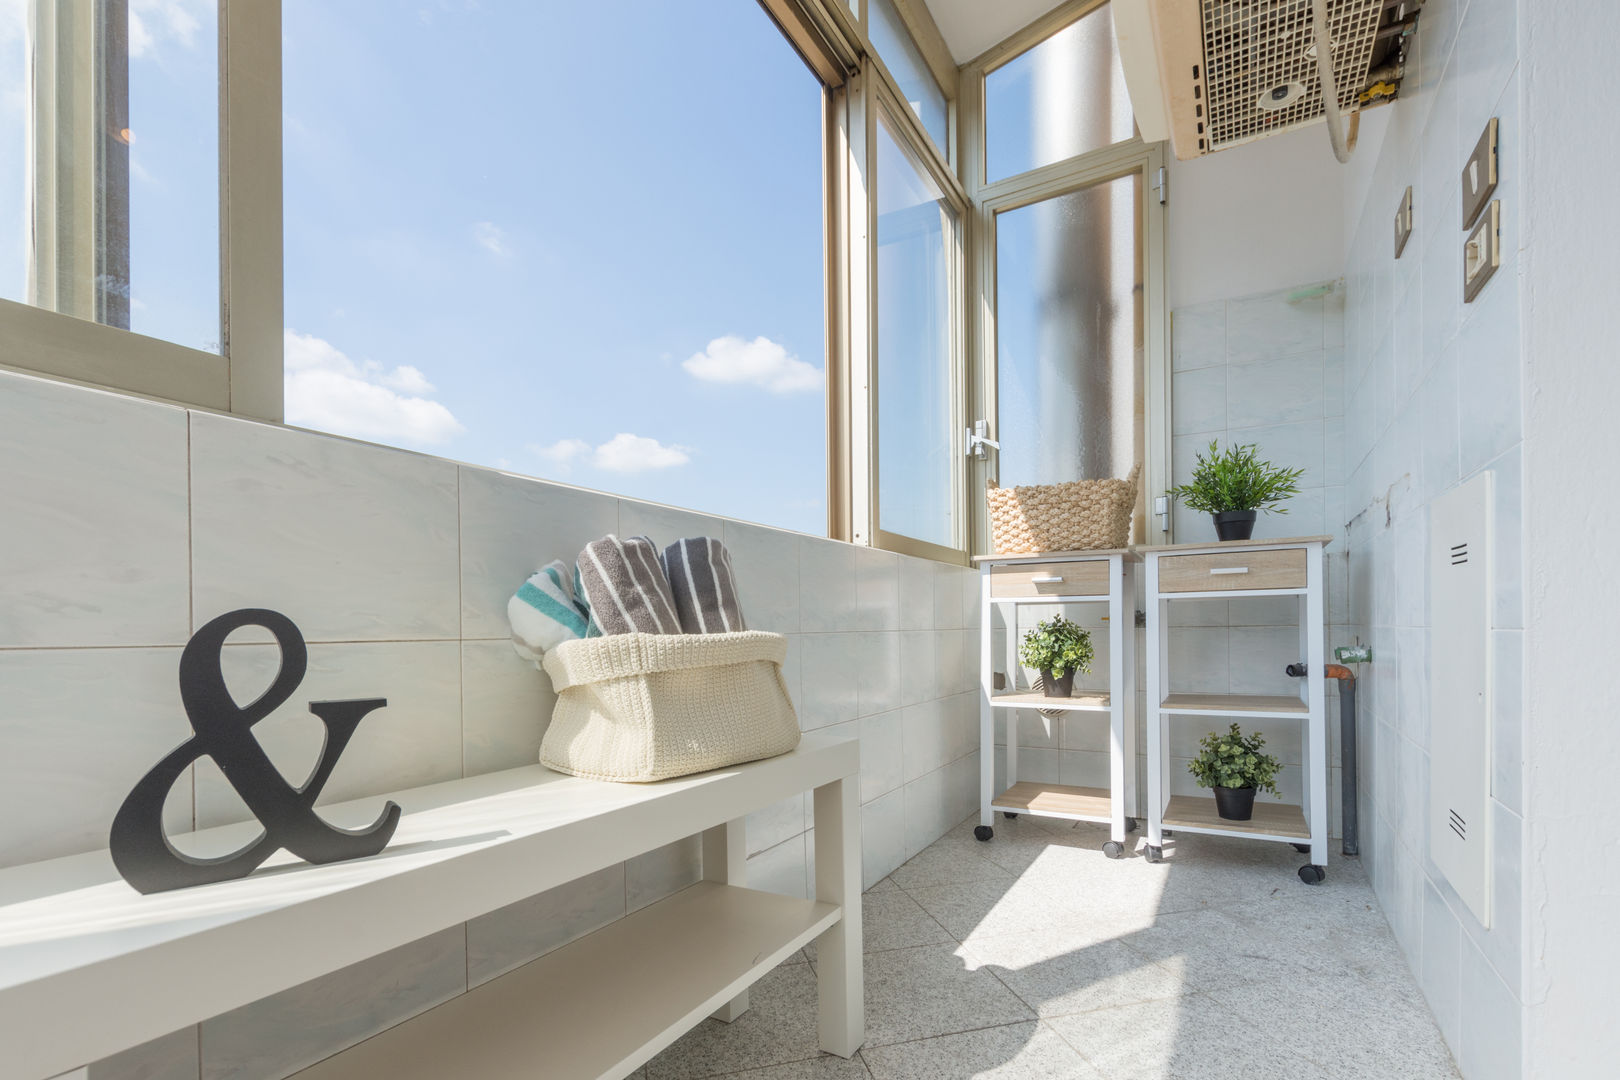 HOME STAGING CESENA home staging a Cesena centro storico, Mirna Casadei Home Staging Mirna Casadei Home Staging Balcony